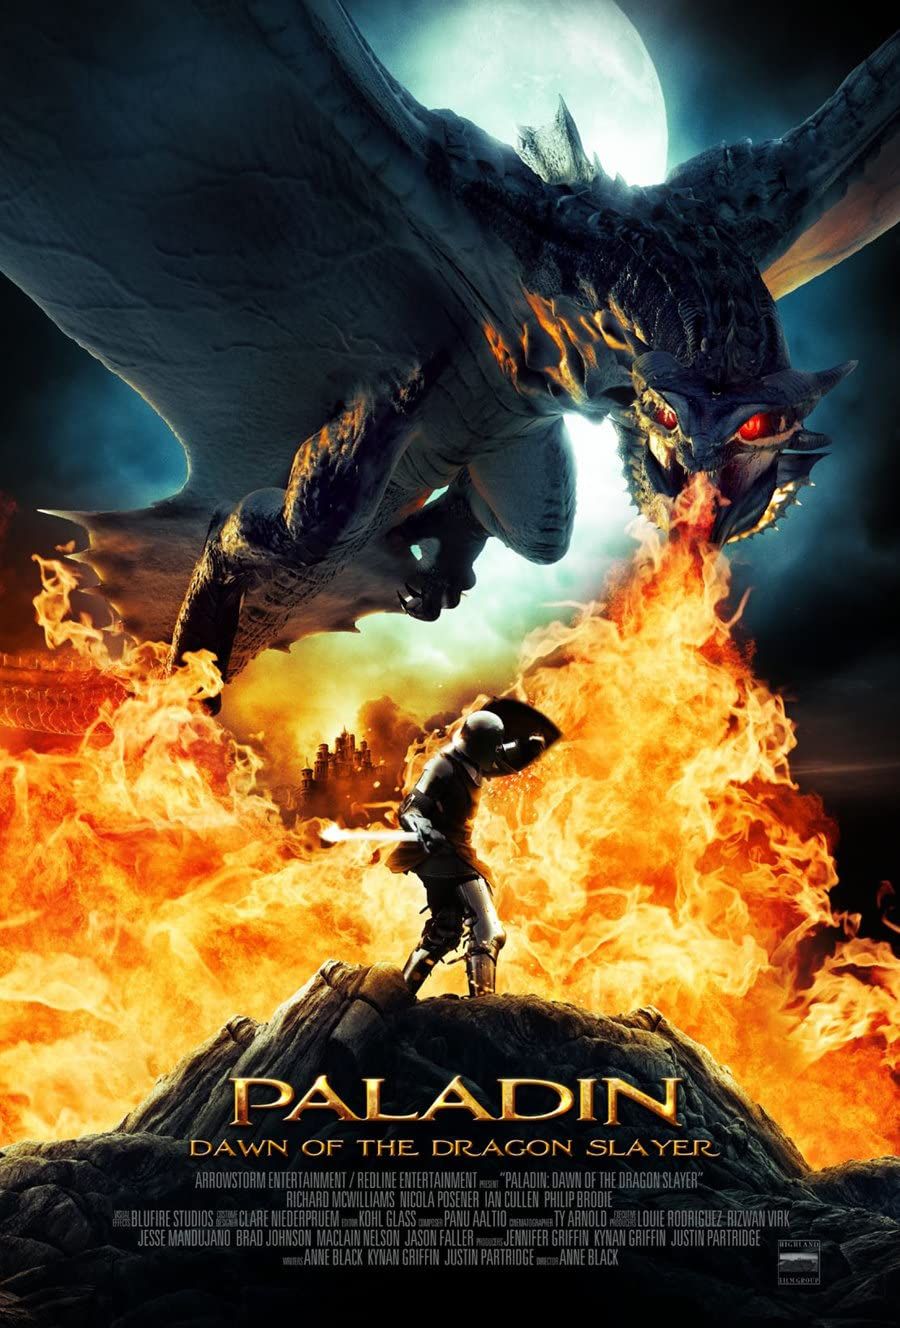 Dawn of the Dragonslayer (2011) Hindi Dubbed BluRay download full movie